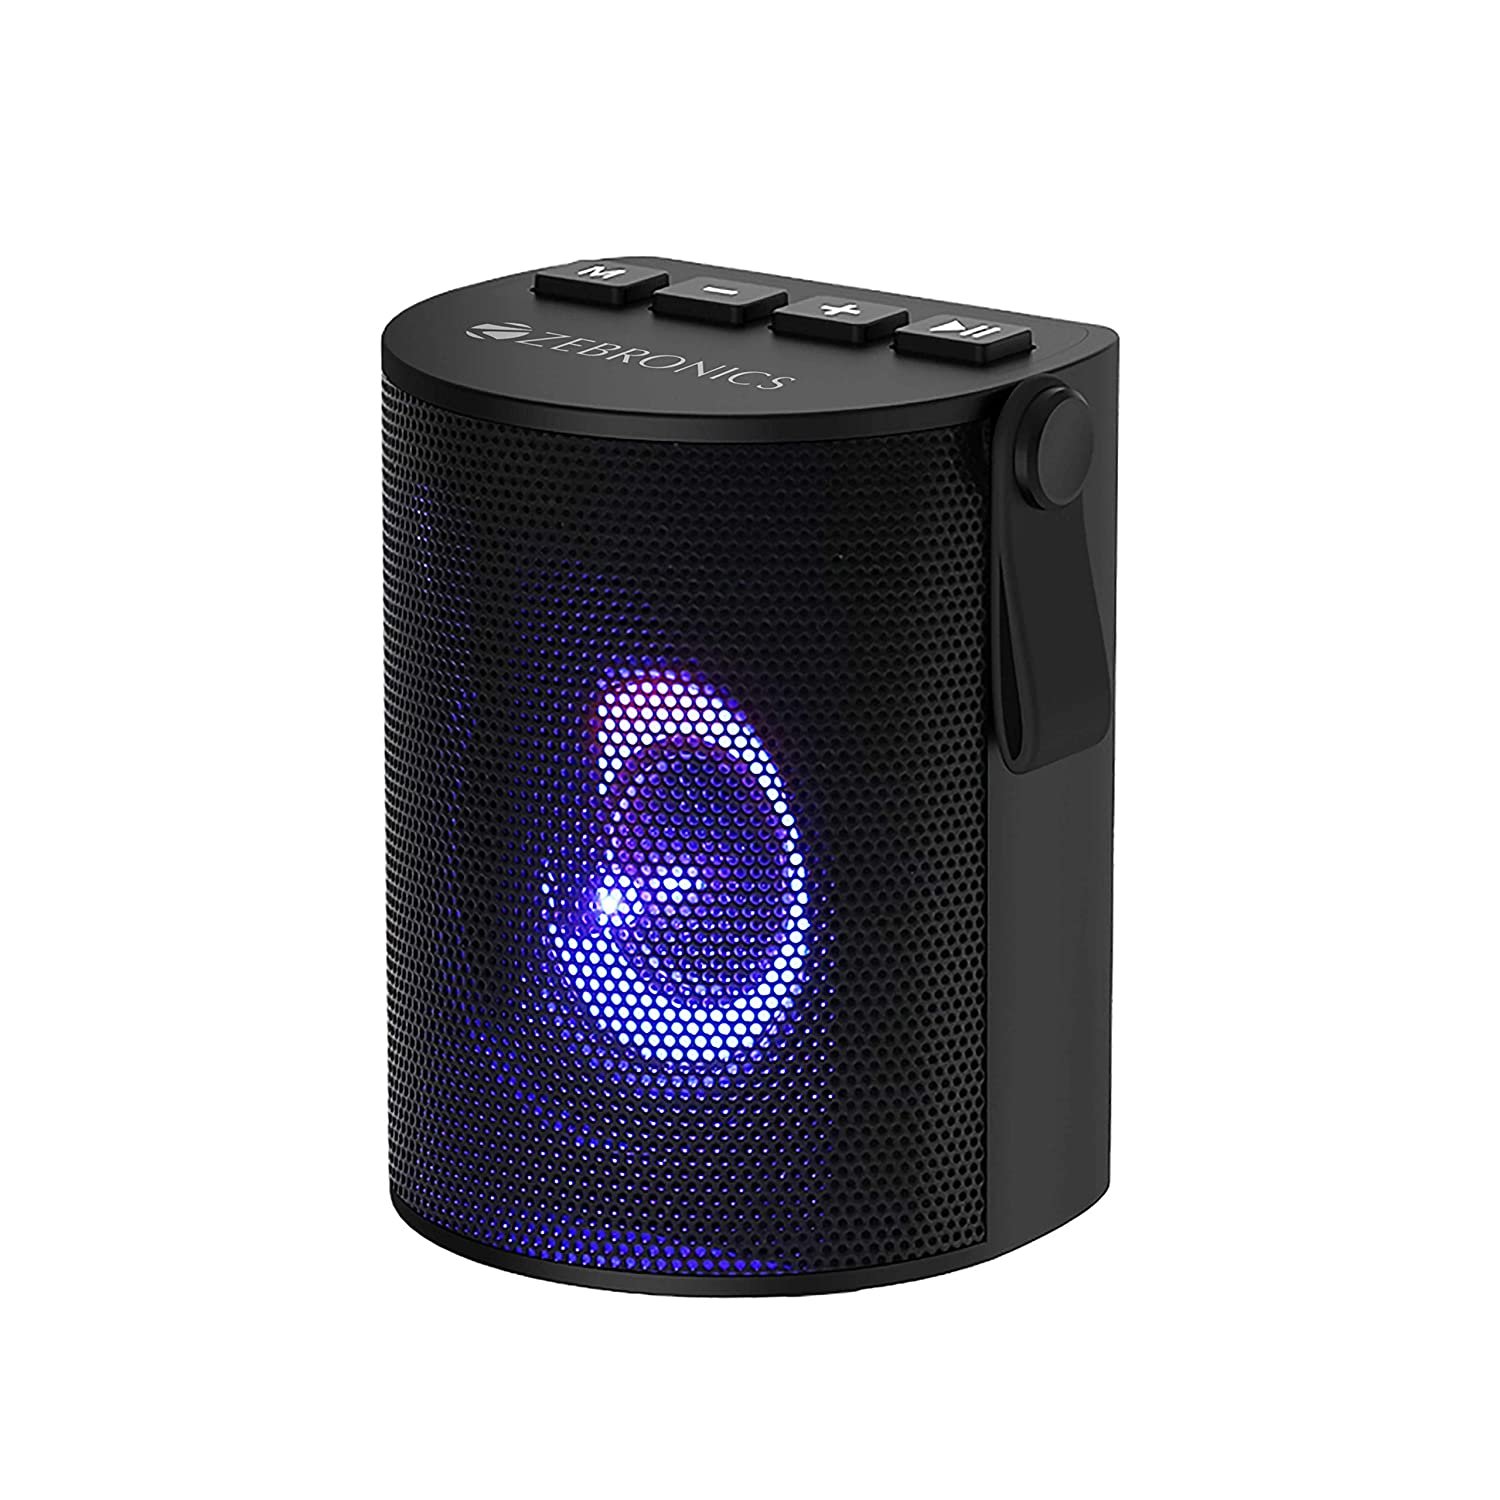 Zebronics Zeb-Bellow Portable Speaker with Bluetooth Supporting